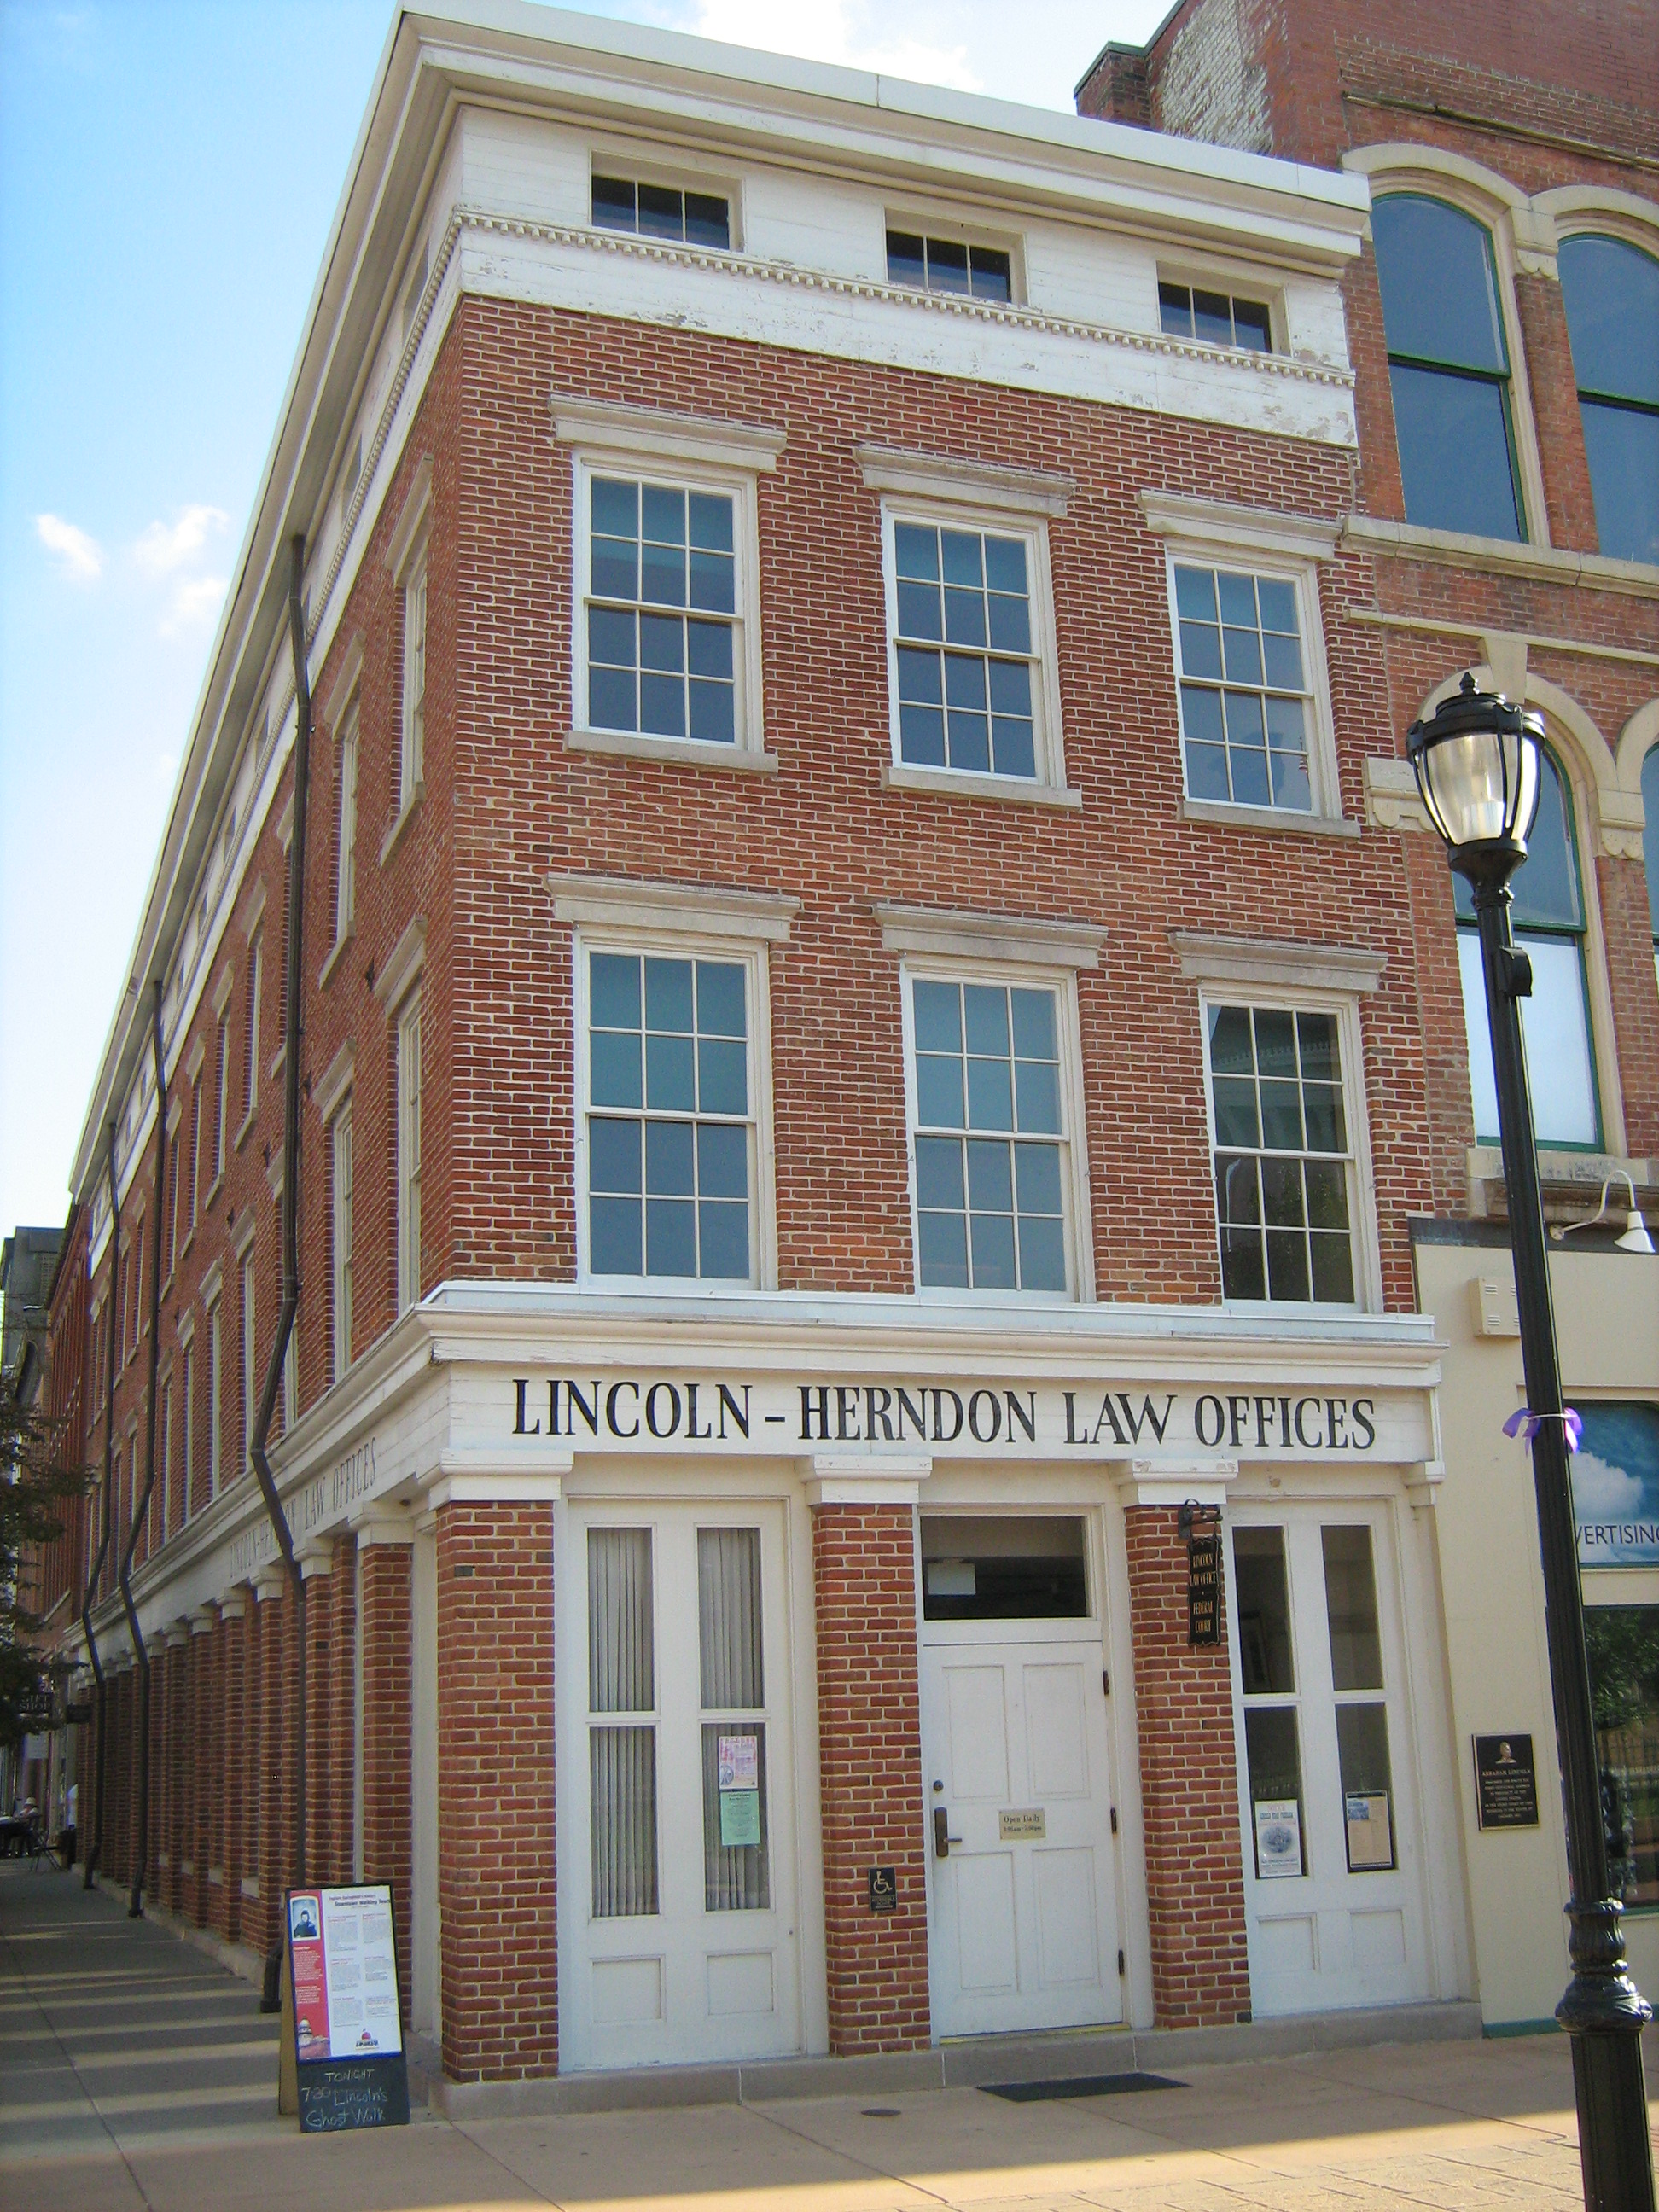 Lincoln-Herndon Law Offices State Historic Site - Wikipedia